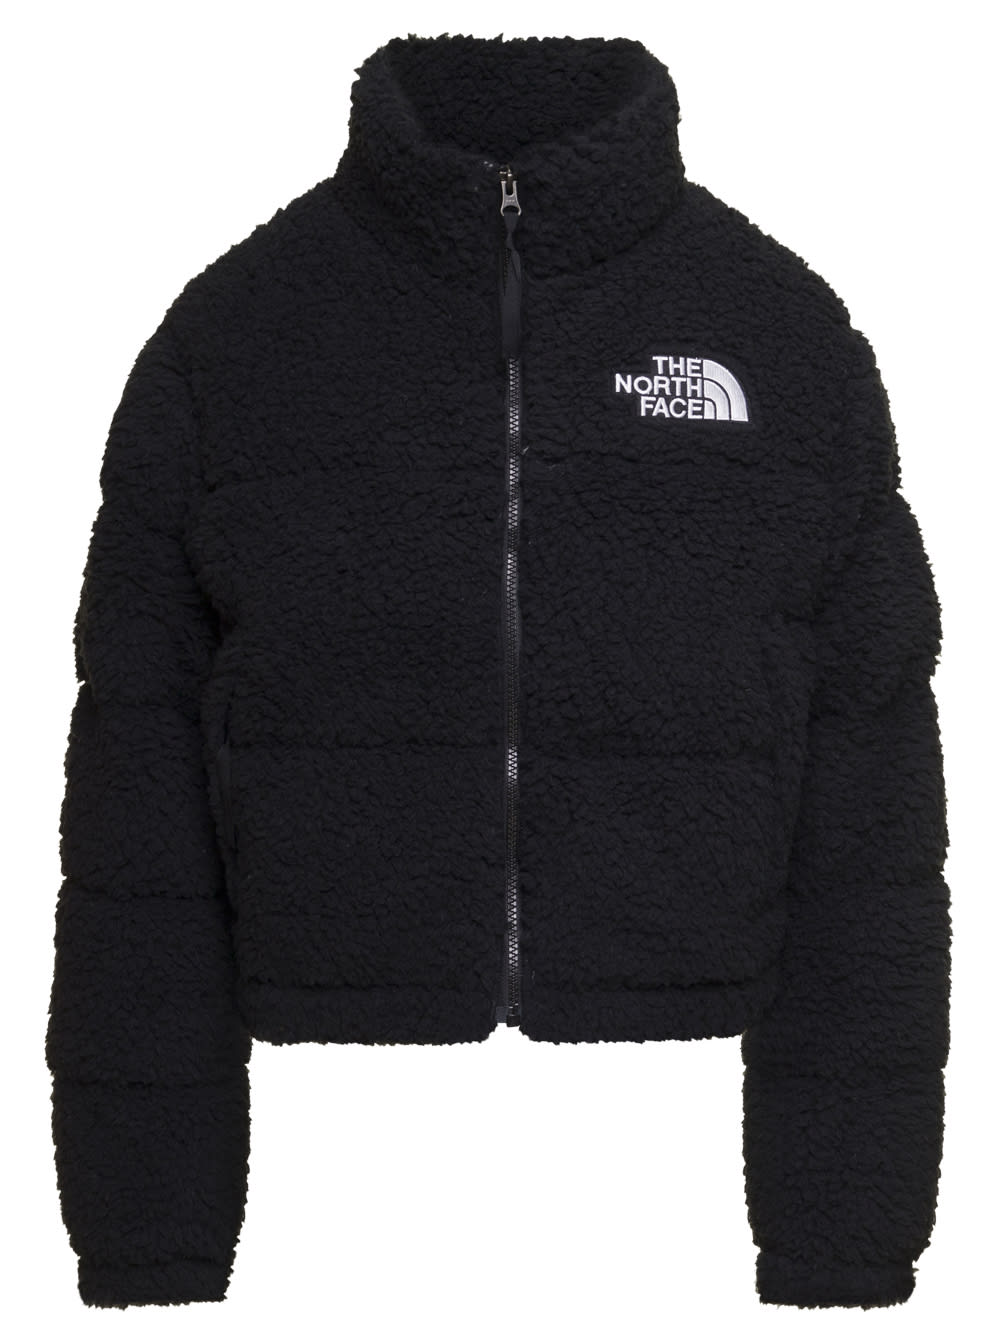 THE NORTH FACE NUPTSE SHORT BLACK HGH PILE JACKET WITH CONTRASTING LOGO WOMAN THE NORTH FACE